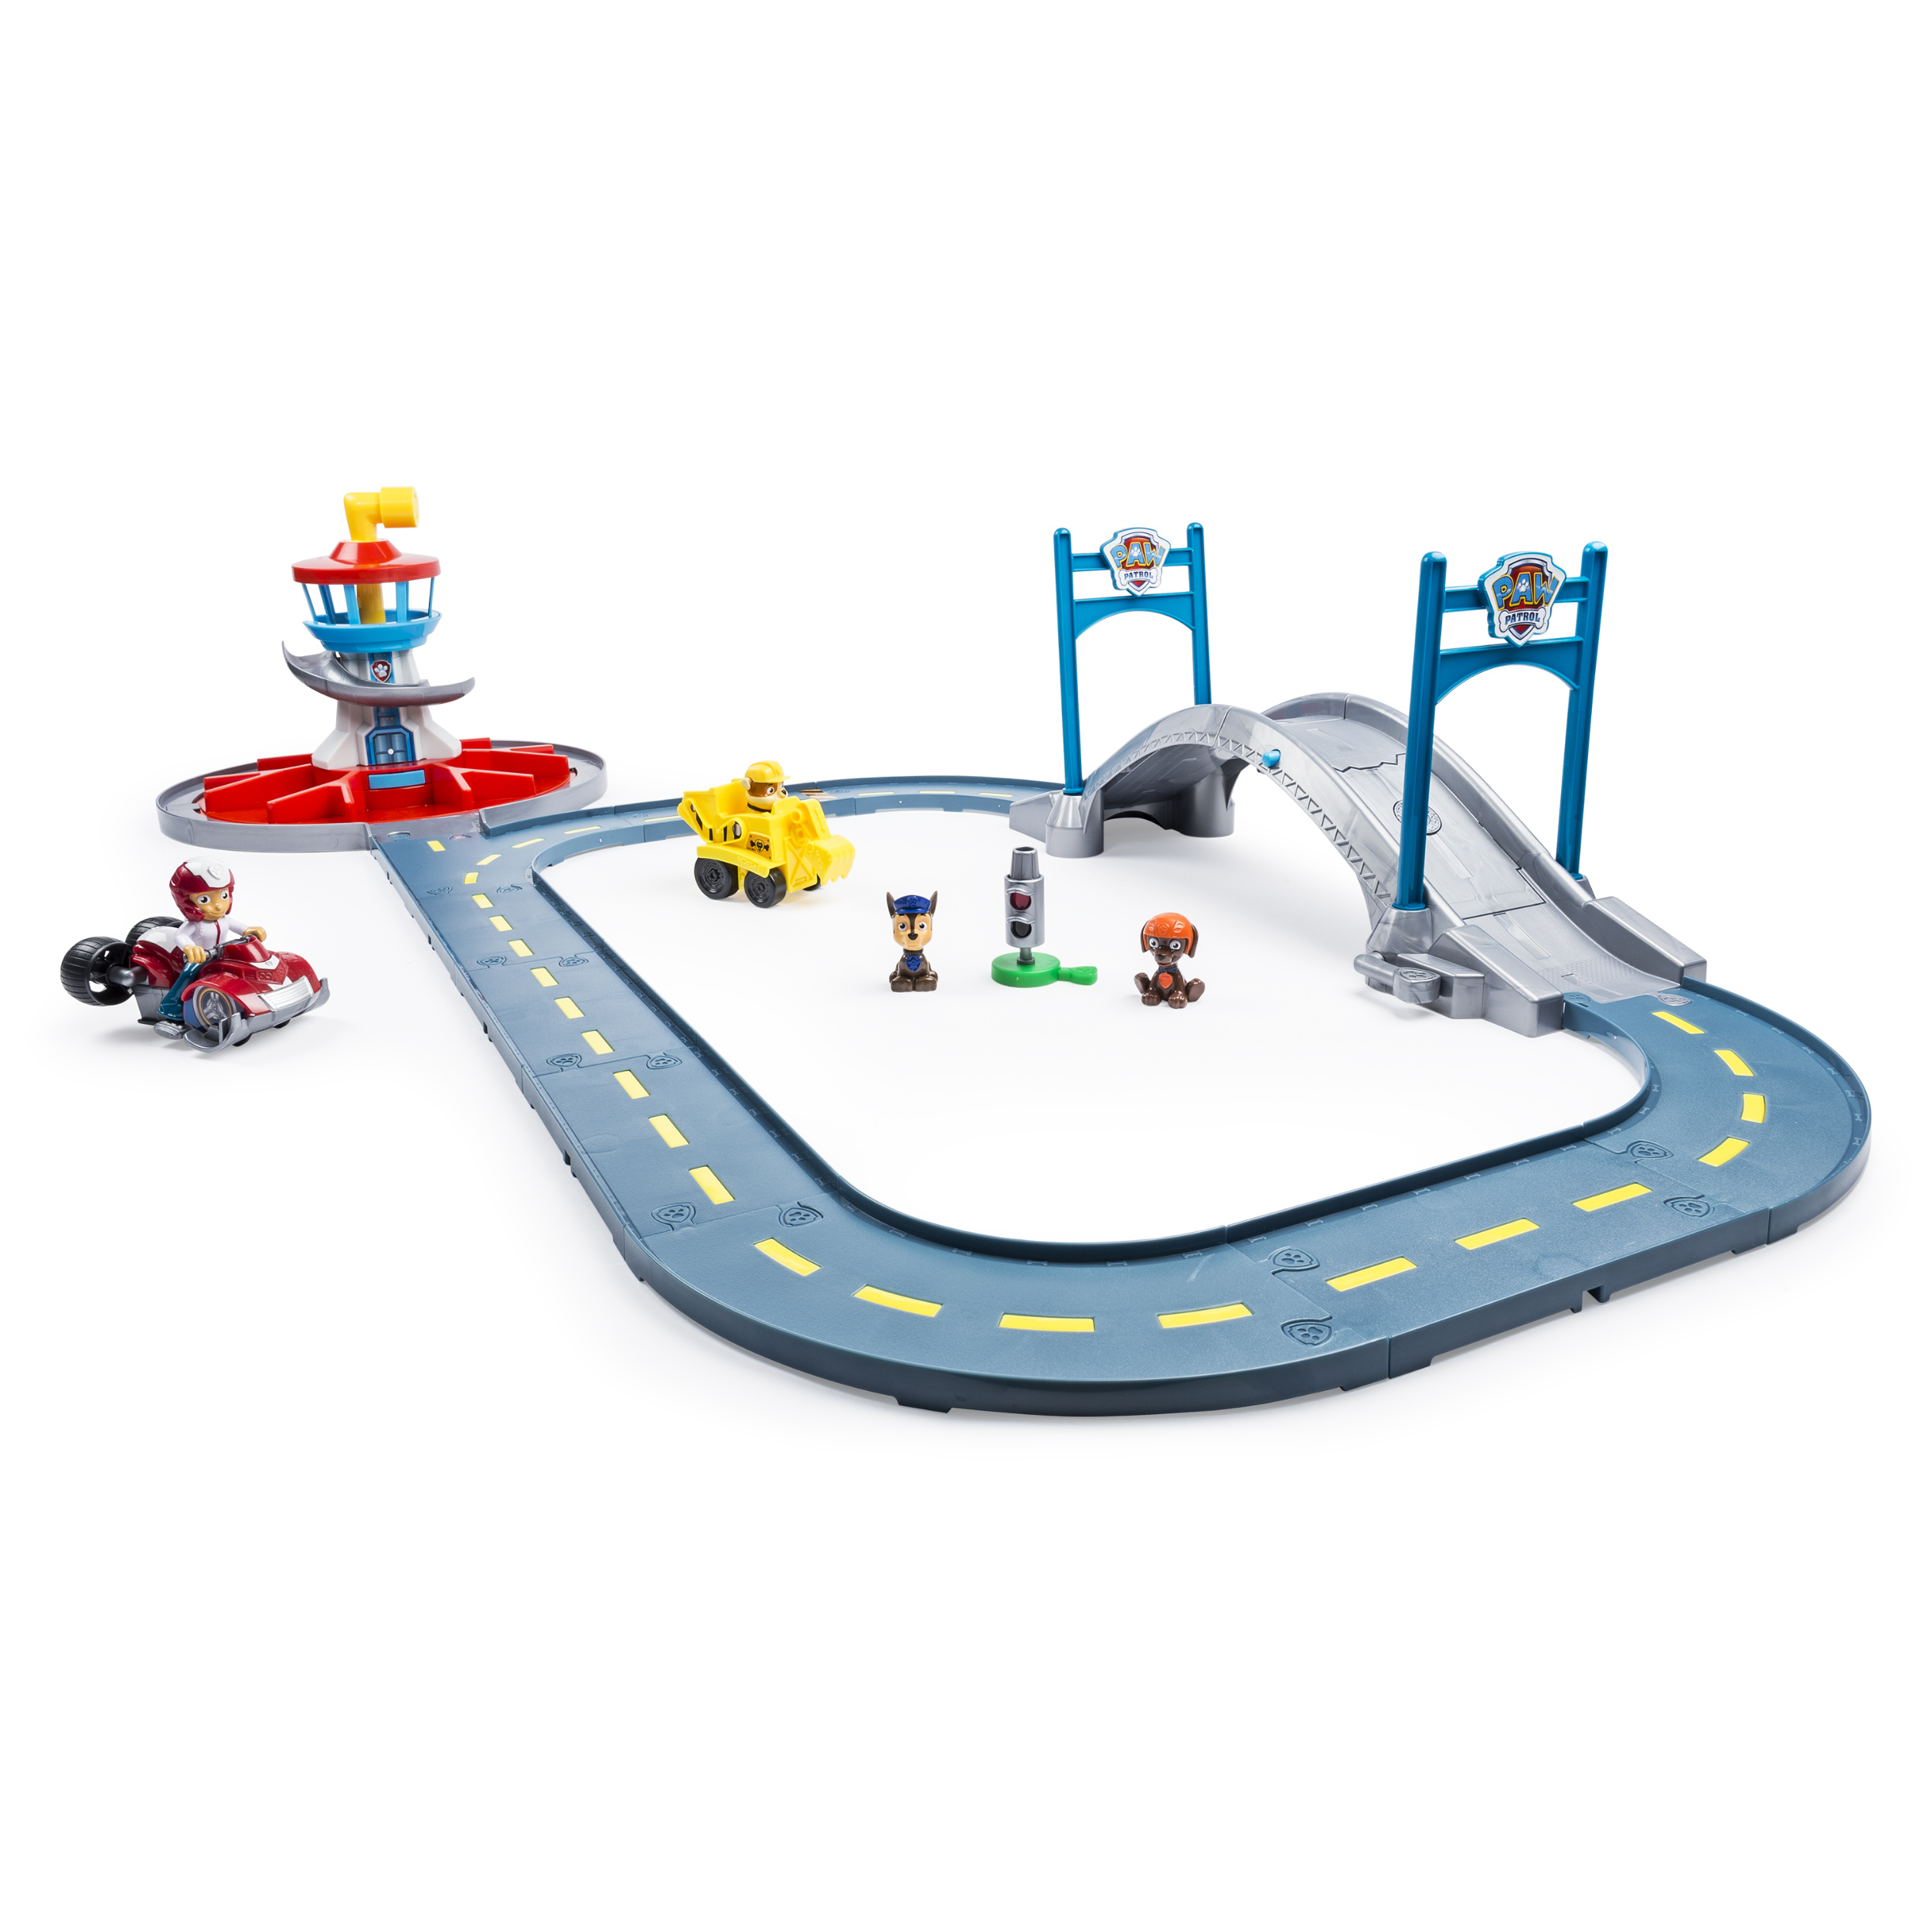 Paw Patrol - Launch N Roll Lookout Tower Track Set - image 1 of 8